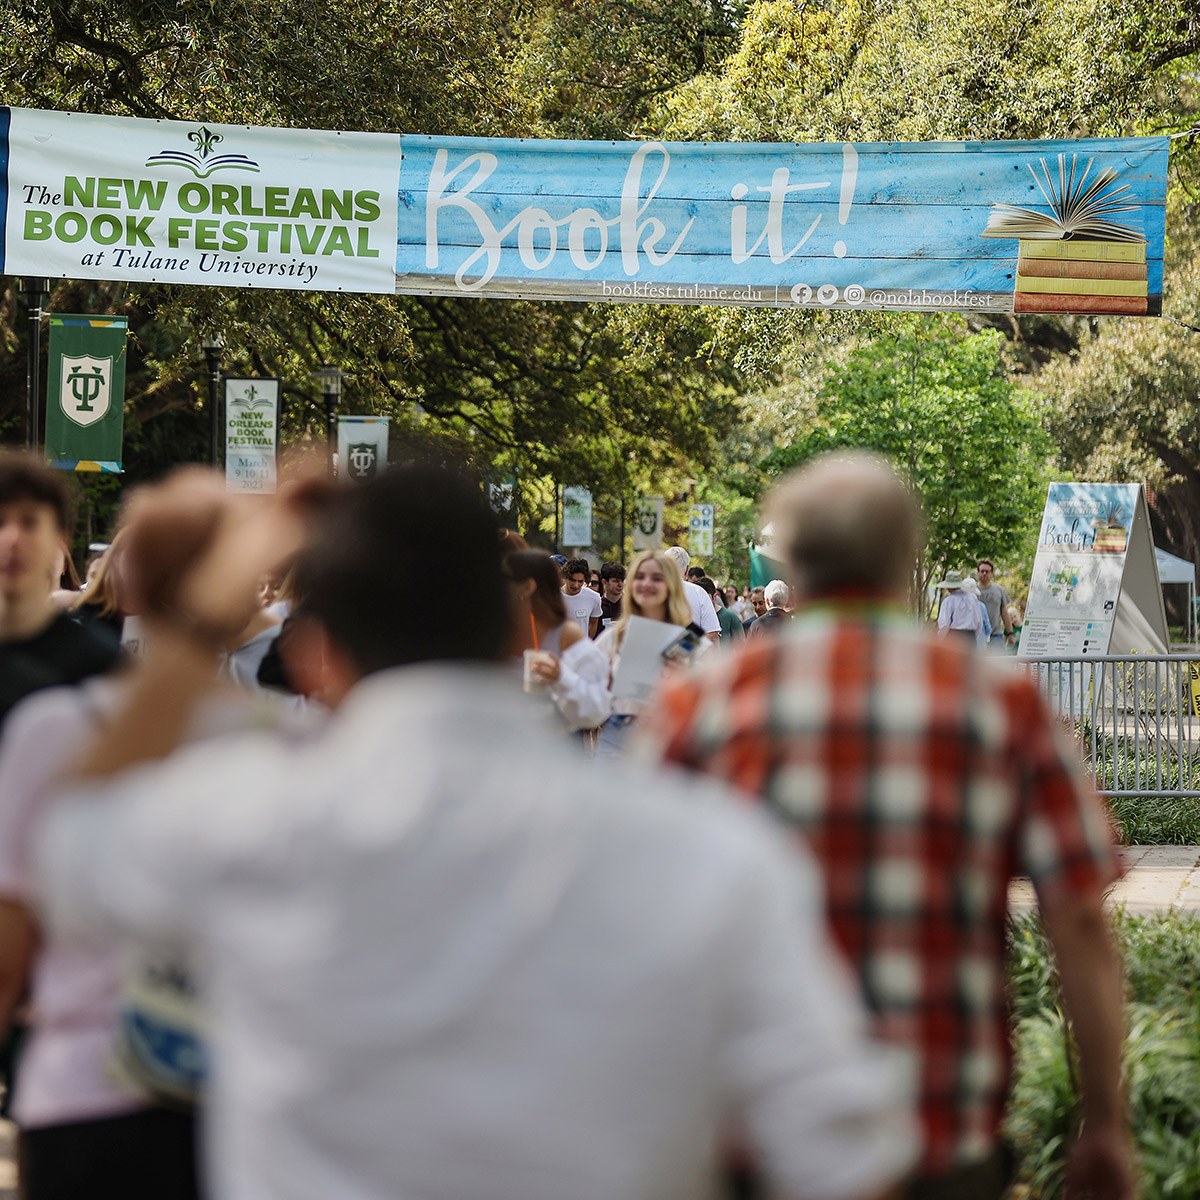 People walking through Tulane's campus under a banner promoting Book Festival 